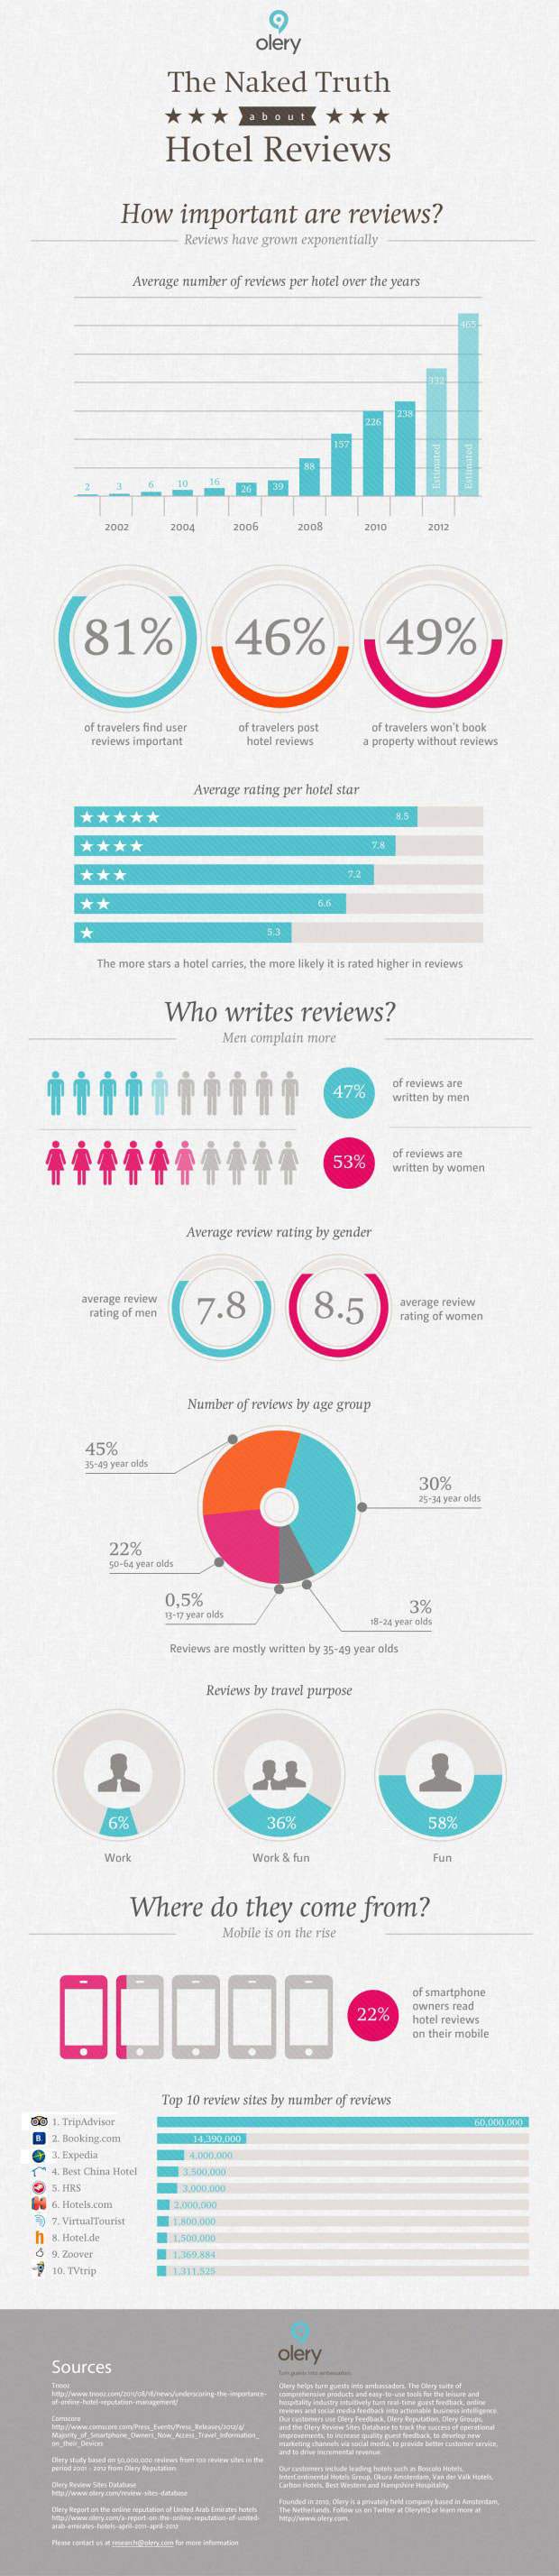 Olery-infographic-naked-truth-about-hotel-reviews-big_whblog-620x2856